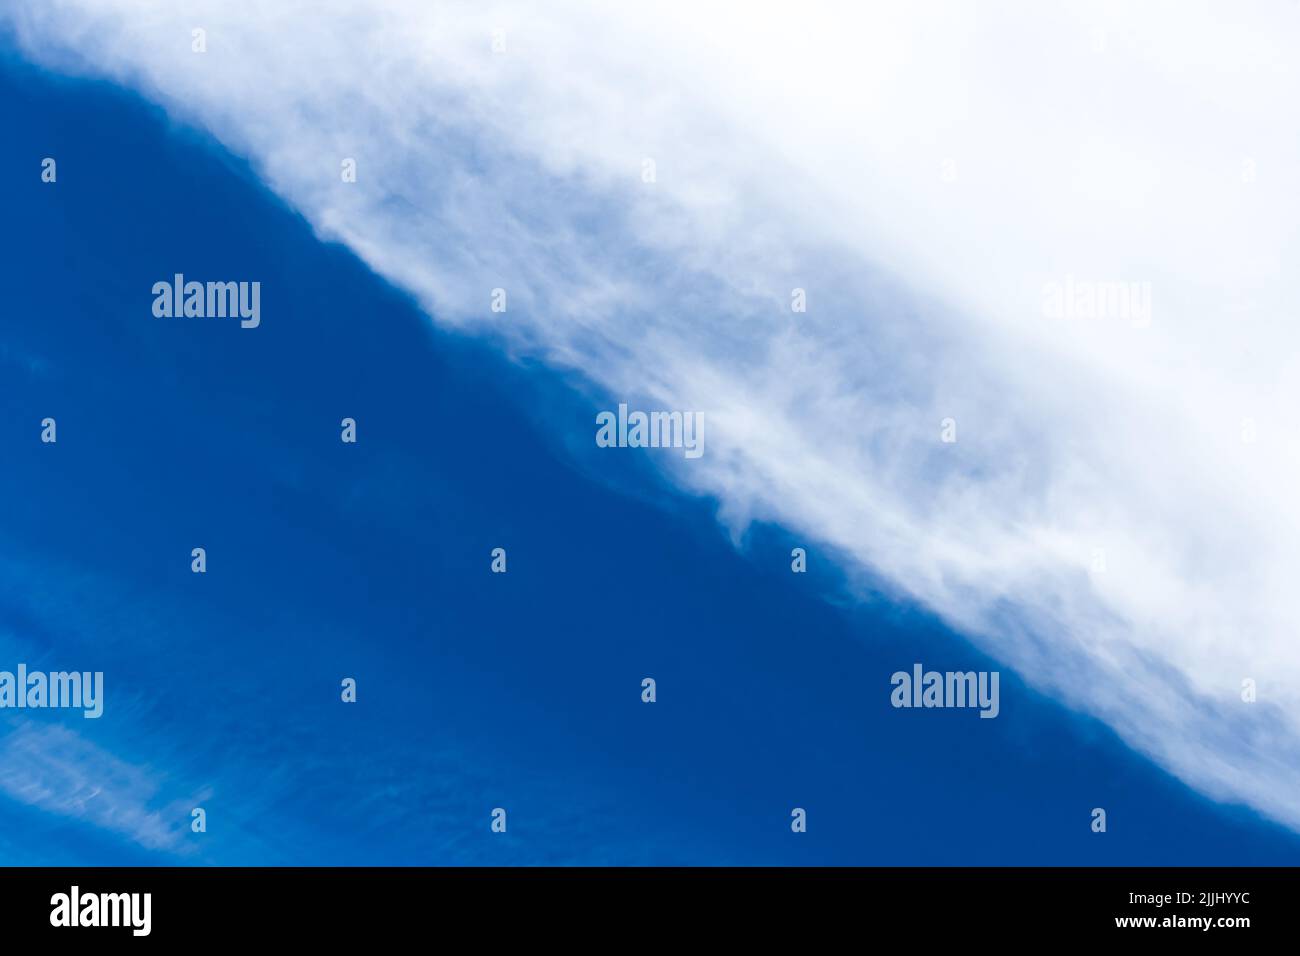 Diagonal line pattern abstract nature of white clouds and blue sky background. Stock Photo